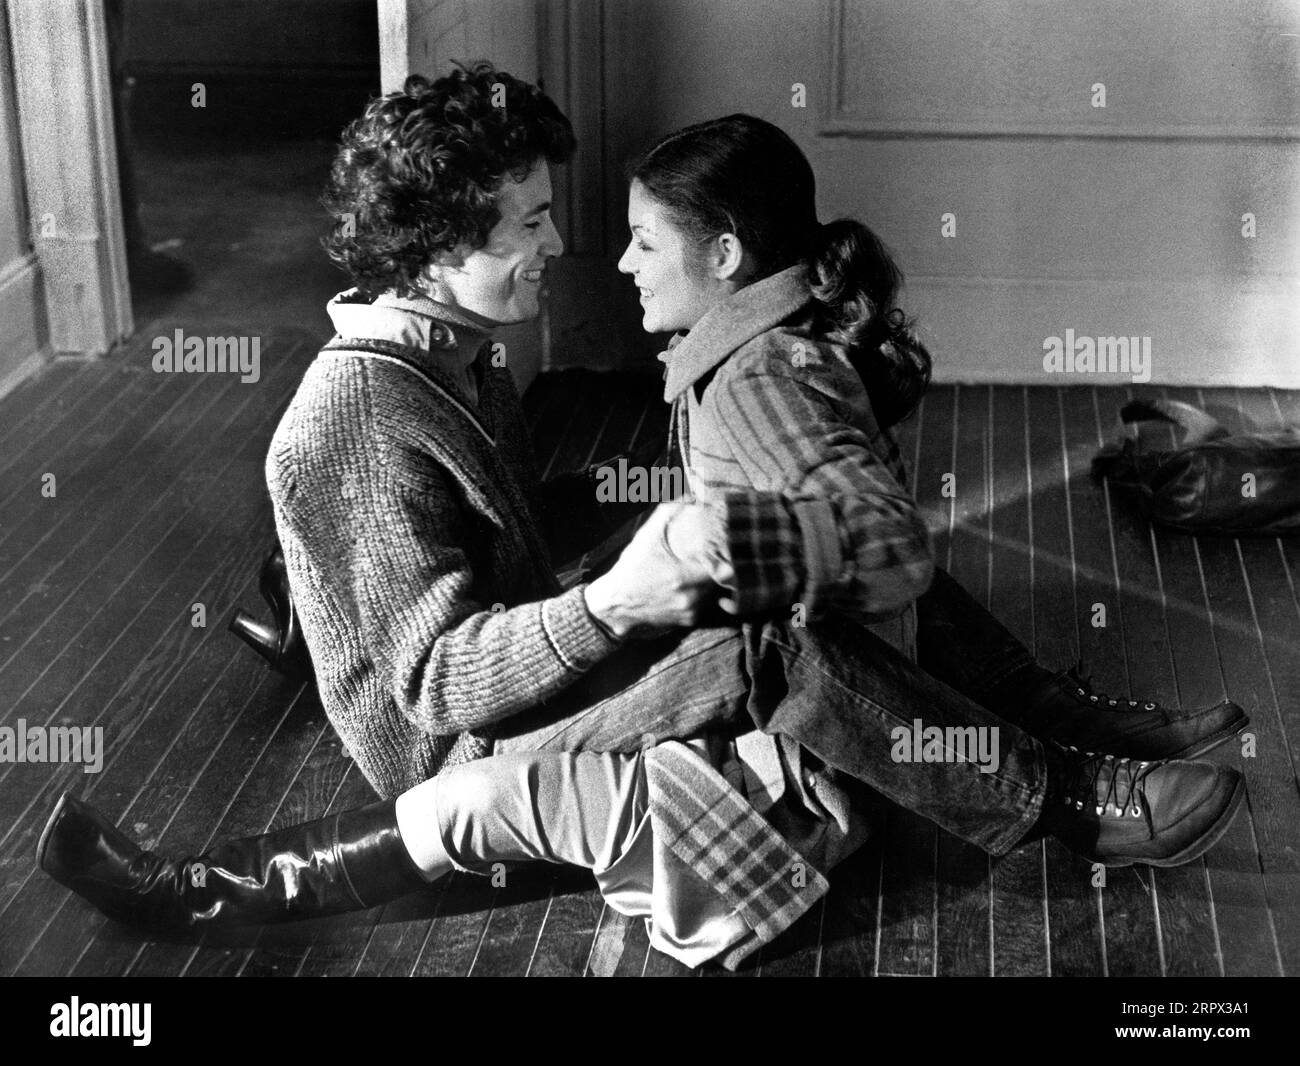 Michael Ontkean, Amy Irving, sul set del film "Voices", MGM, United Artists, 1979 Foto Stock